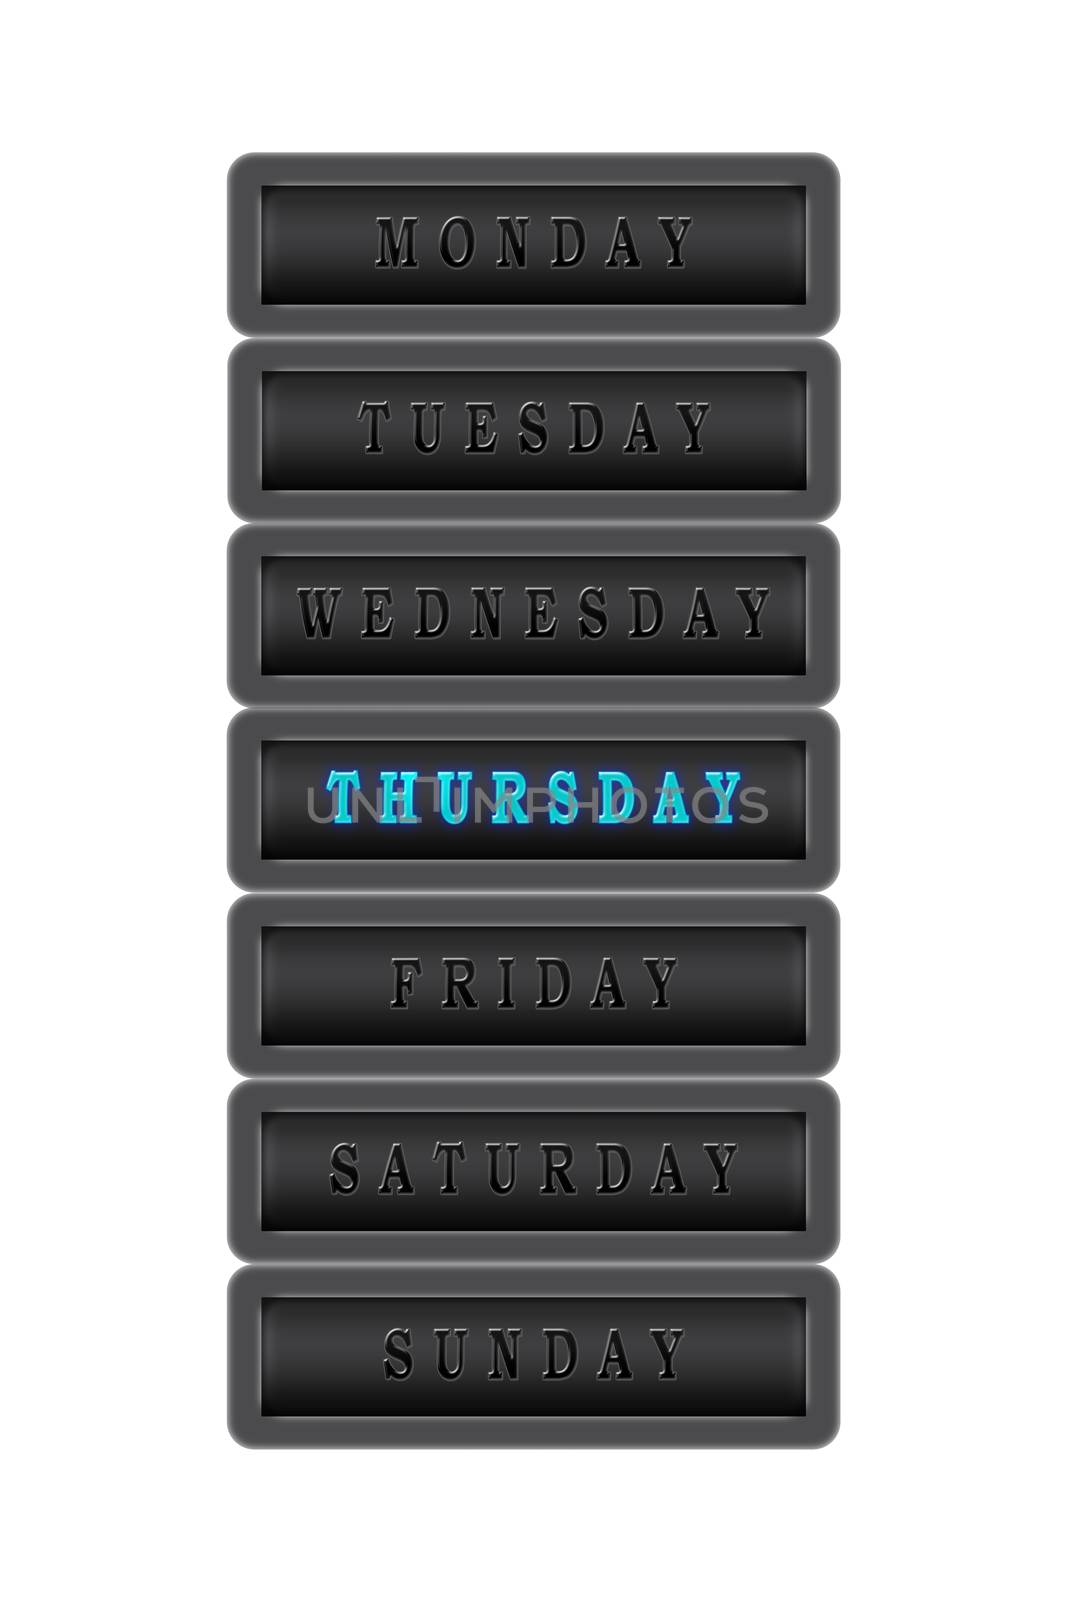 In the days of the week list, Thursday is highlighted in blue on a dark background

Among the days of the week, Thursday is highlighted in blue on a dark background.  The rest of the days are black on a dark background.